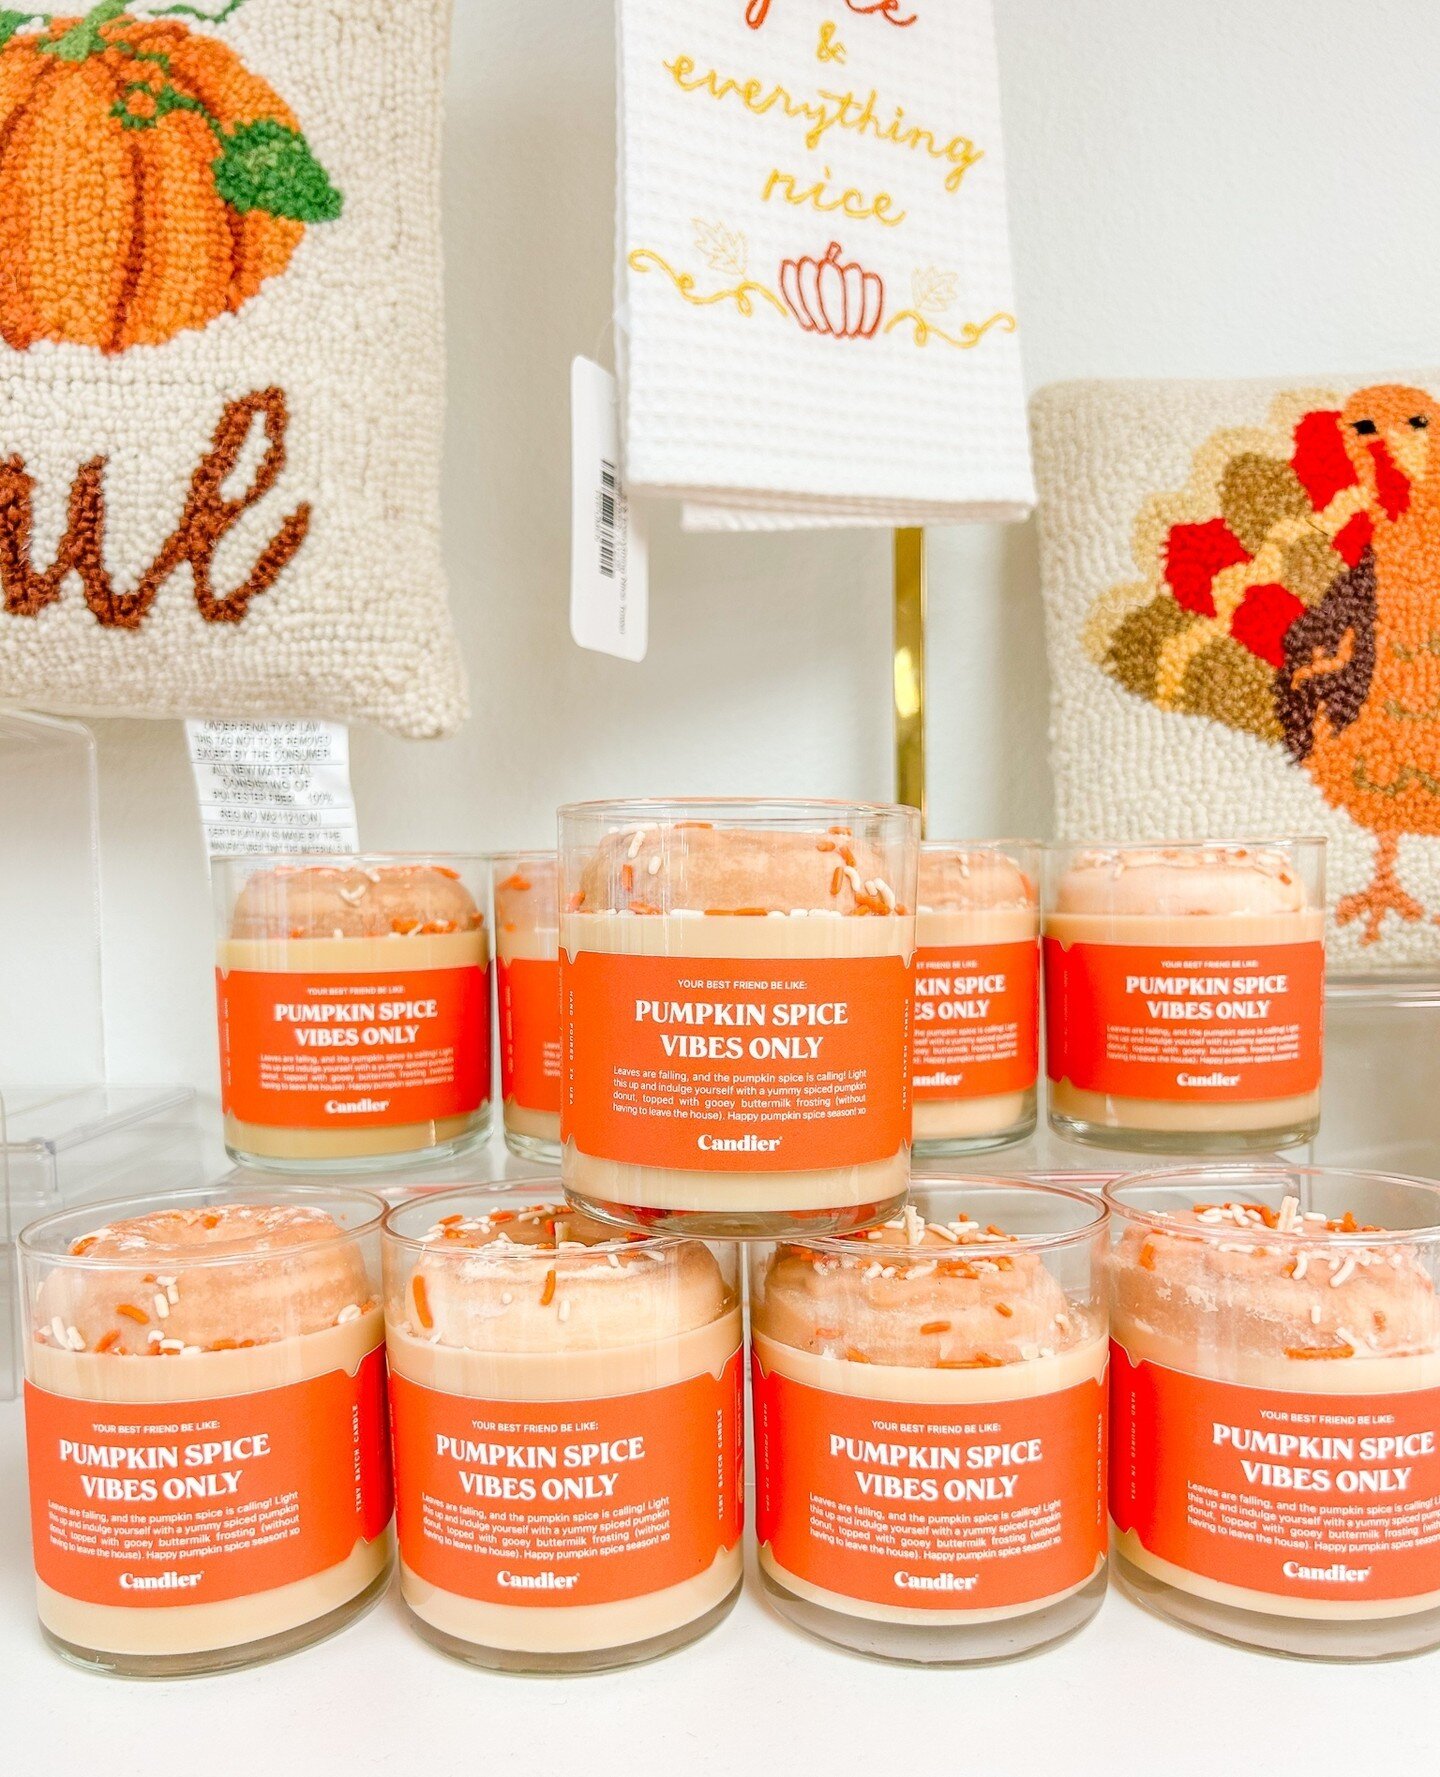 Can't find any pumpkin pie? Get pumpkin pie vibes with our Pumpkin Spice donut candle. Zoom in to get a good laugh.⁠
⁠
Tap the tag to shop. 🧡✨